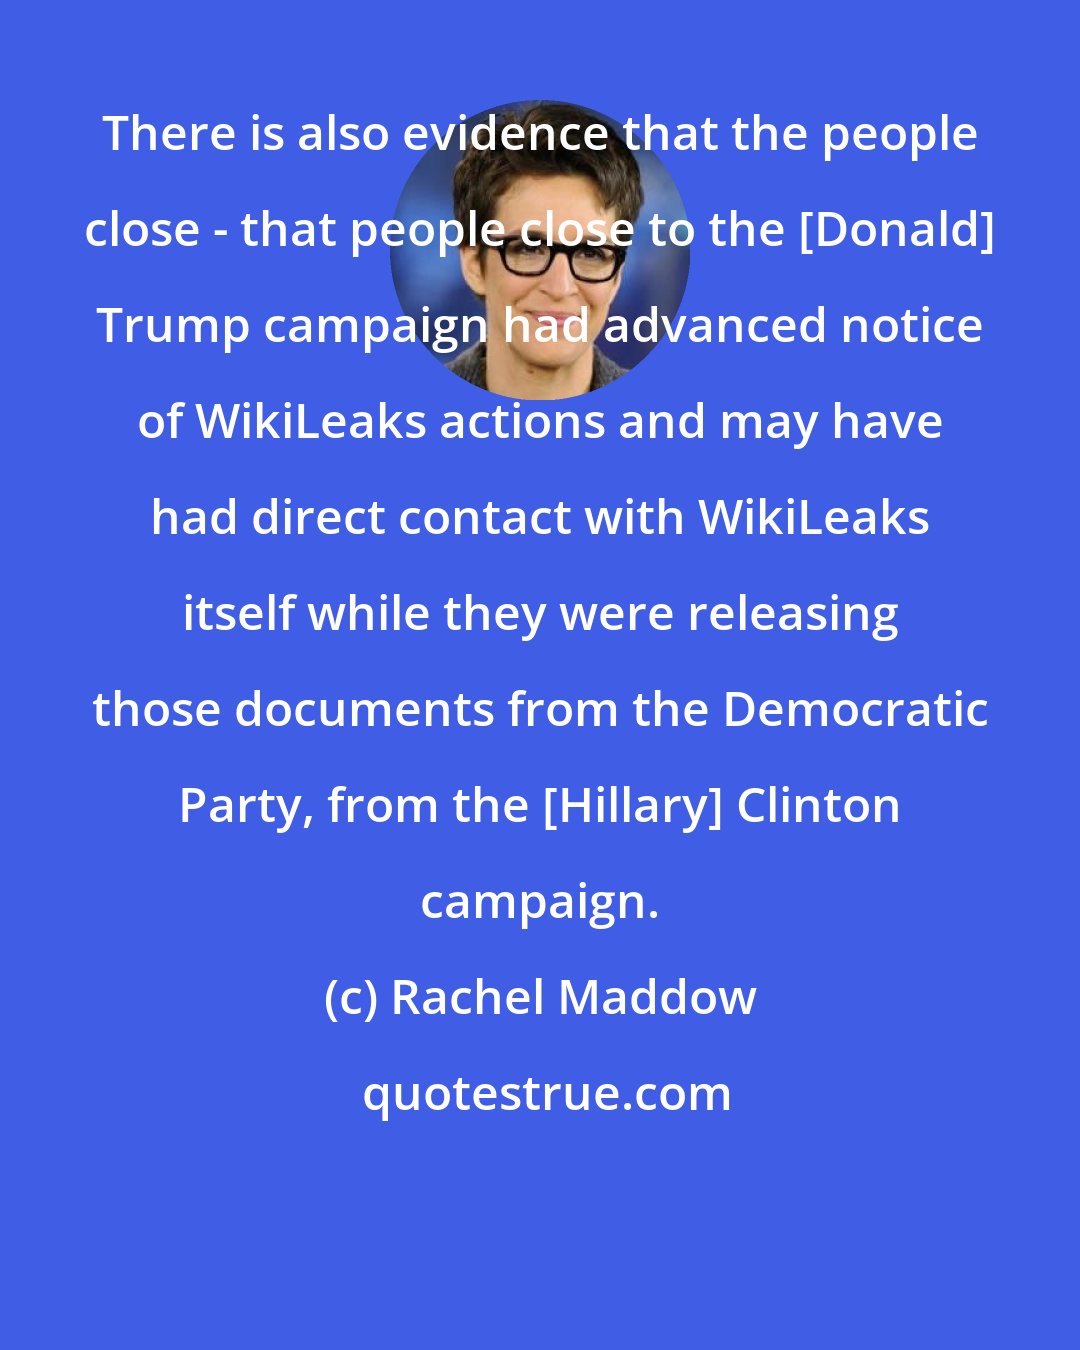 Rachel Maddow: There is also evidence that the people close - that people close to the [Donald] Trump campaign had advanced notice of WikiLeaks actions and may have had direct contact with WikiLeaks itself while they were releasing those documents from the Democratic Party, from the [Hillary] Clinton campaign.